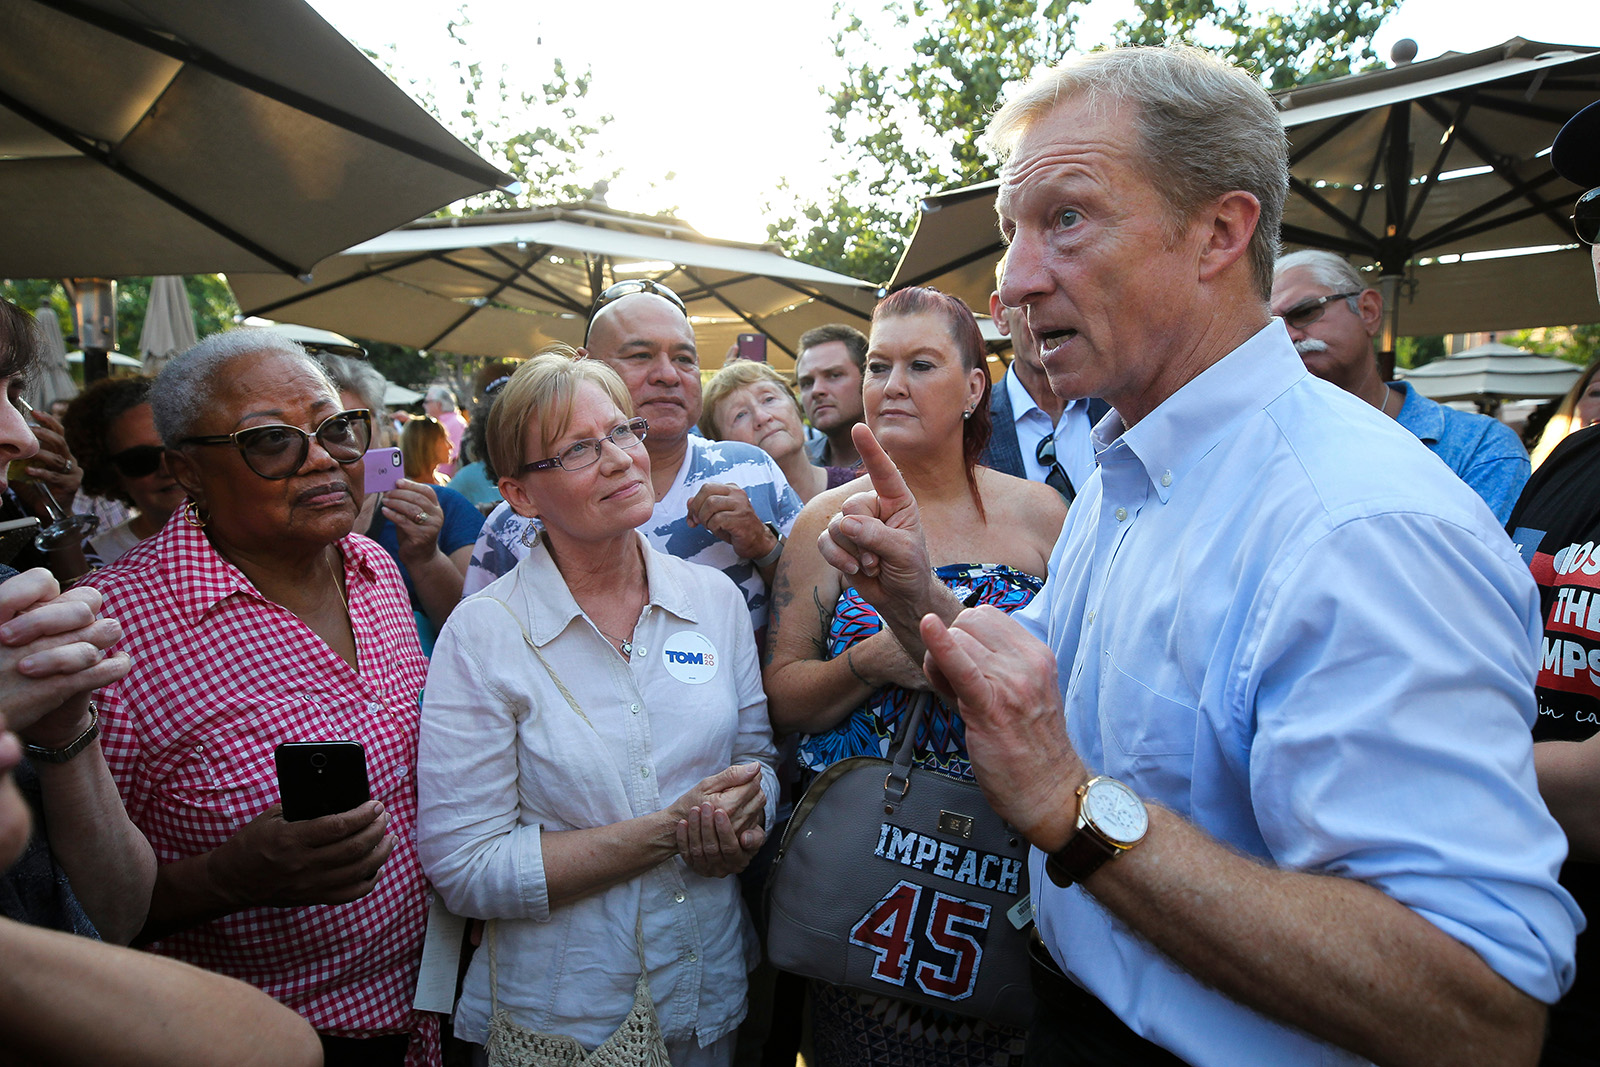 PHOTO: Tom Steyer, a candidate in the 2020 Democratic Party presidential primaries, speaks to supporters in San Diego, Calif., on Aug. 27, 2019.